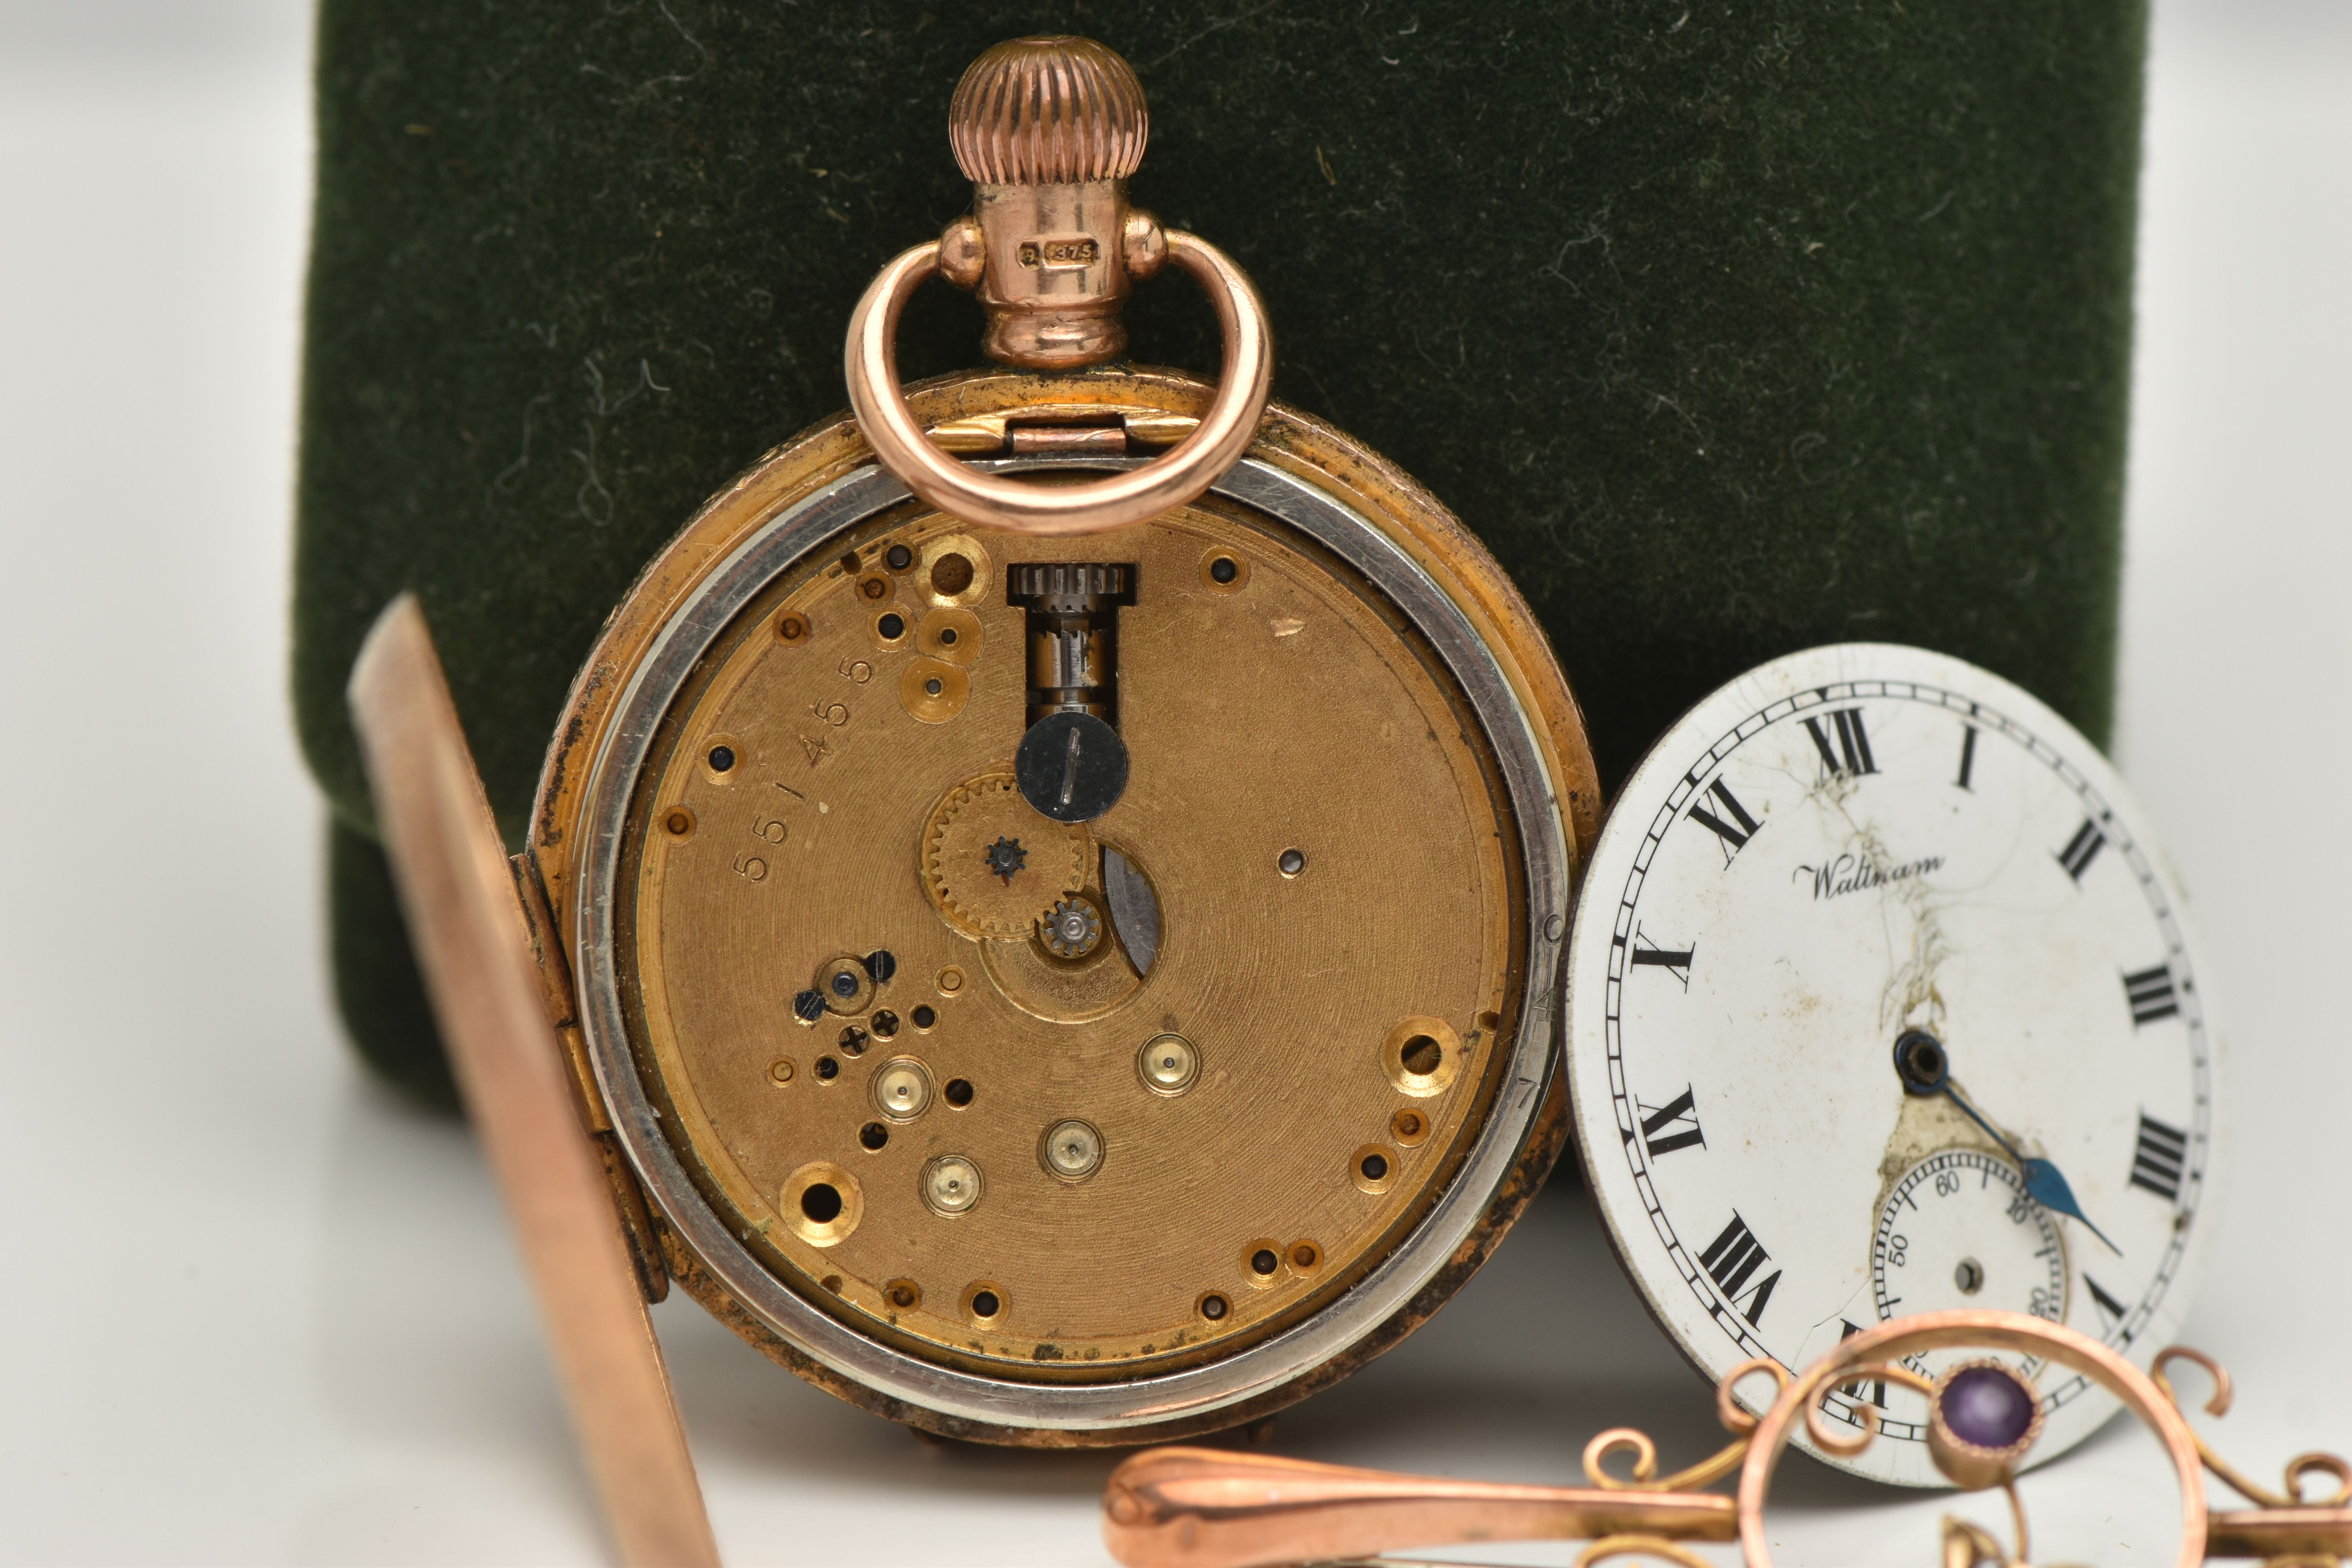 A ROSE METAL BAR BROOCH AND A LADIES POCKET WATCH, the brooch depicting a flower set with a circular - Image 4 of 6